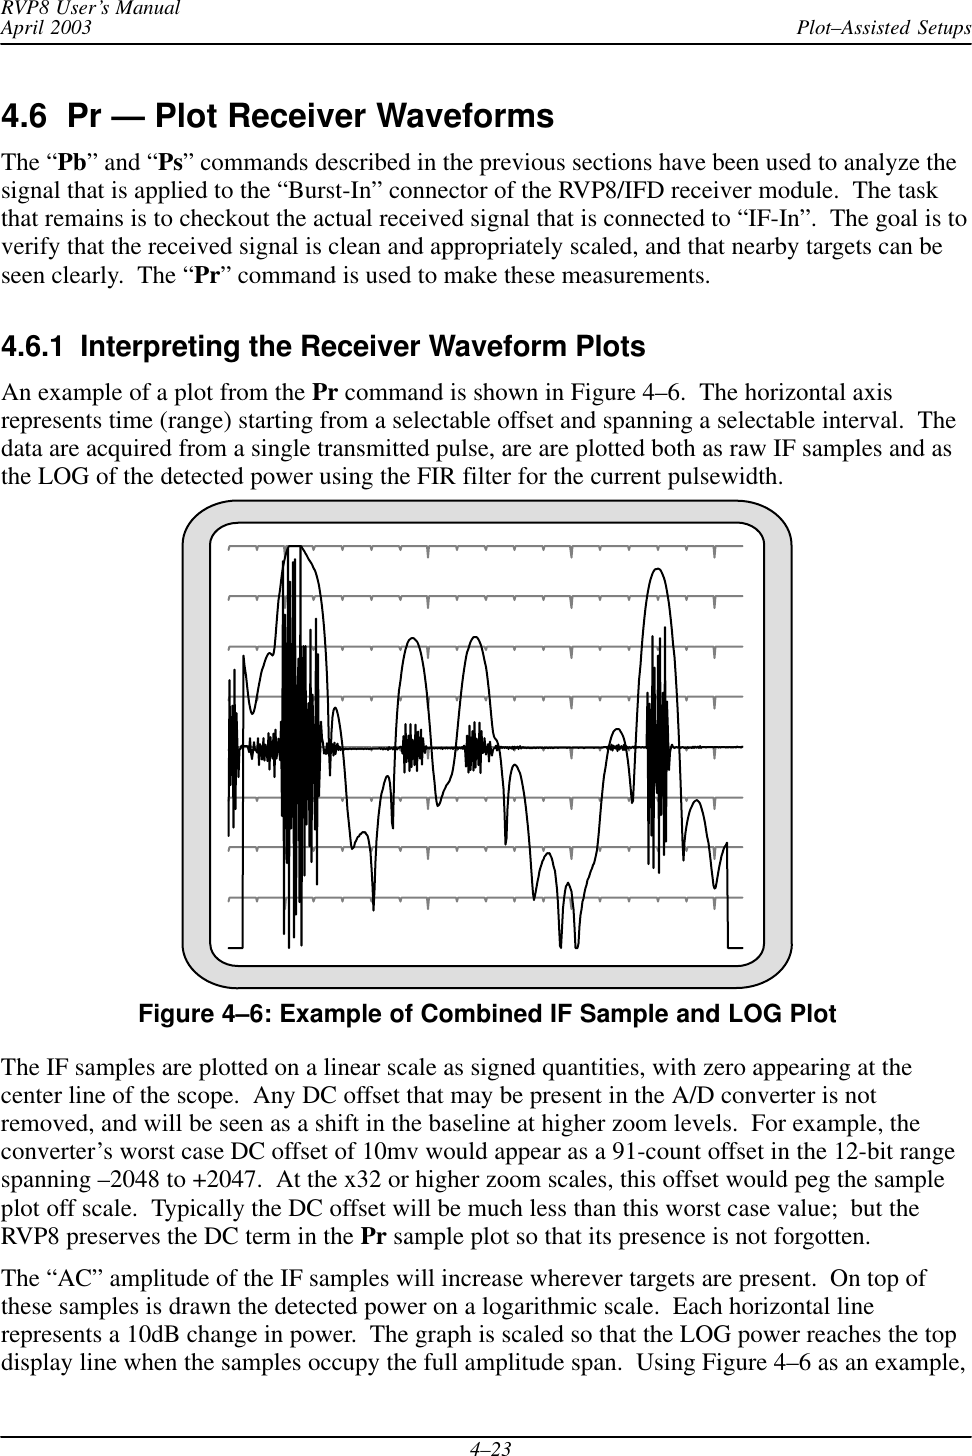 Plot–Assisted SetupsRVP8 User’s ManualApril 20034–234.6  Pr — Plot Receiver WaveformsThe “Pb” and “Ps” commands described in the previous sections have been used to analyze thesignal that is applied to the “Burst-In” connector of the RVP8/IFD receiver module.  The taskthat remains is to checkout the actual received signal that is connected to “IF-In”.  The goal is toverify that the received signal is clean and appropriately scaled, and that nearby targets can beseen clearly.  The “Pr” command is used to make these measurements.4.6.1  Interpreting the Receiver Waveform PlotsAn example of a plot from the Pr command is shown in Figure 4–6.  The horizontal axisrepresents time (range) starting from a selectable offset and spanning a selectable interval.  Thedata are acquired from a single transmitted pulse, are are plotted both as raw IF samples and asthe LOG of the detected power using the FIR filter for the current pulsewidth.Figure 4–6: Example of Combined IF Sample and LOG PlotThe IF samples are plotted on a linear scale as signed quantities, with zero appearing at thecenter line of the scope.  Any DC offset that may be present in the A/D converter is notremoved, and will be seen as a shift in the baseline at higher zoom levels.  For example, theconverter’s worst case DC offset of 10mv would appear as a 91-count offset in the 12-bit rangespanning –2048 to +2047.  At the x32 or higher zoom scales, this offset would peg the sampleplot off scale.  Typically the DC offset will be much less than this worst case value;  but theRVP8 preserves the DC term in the Pr sample plot so that its presence is not forgotten.The “AC” amplitude of the IF samples will increase wherever targets are present.  On top ofthese samples is drawn the detected power on a logarithmic scale.  Each horizontal linerepresents a 10dB change in power.  The graph is scaled so that the LOG power reaches the topdisplay line when the samples occupy the full amplitude span.  Using Figure 4–6 as an example,